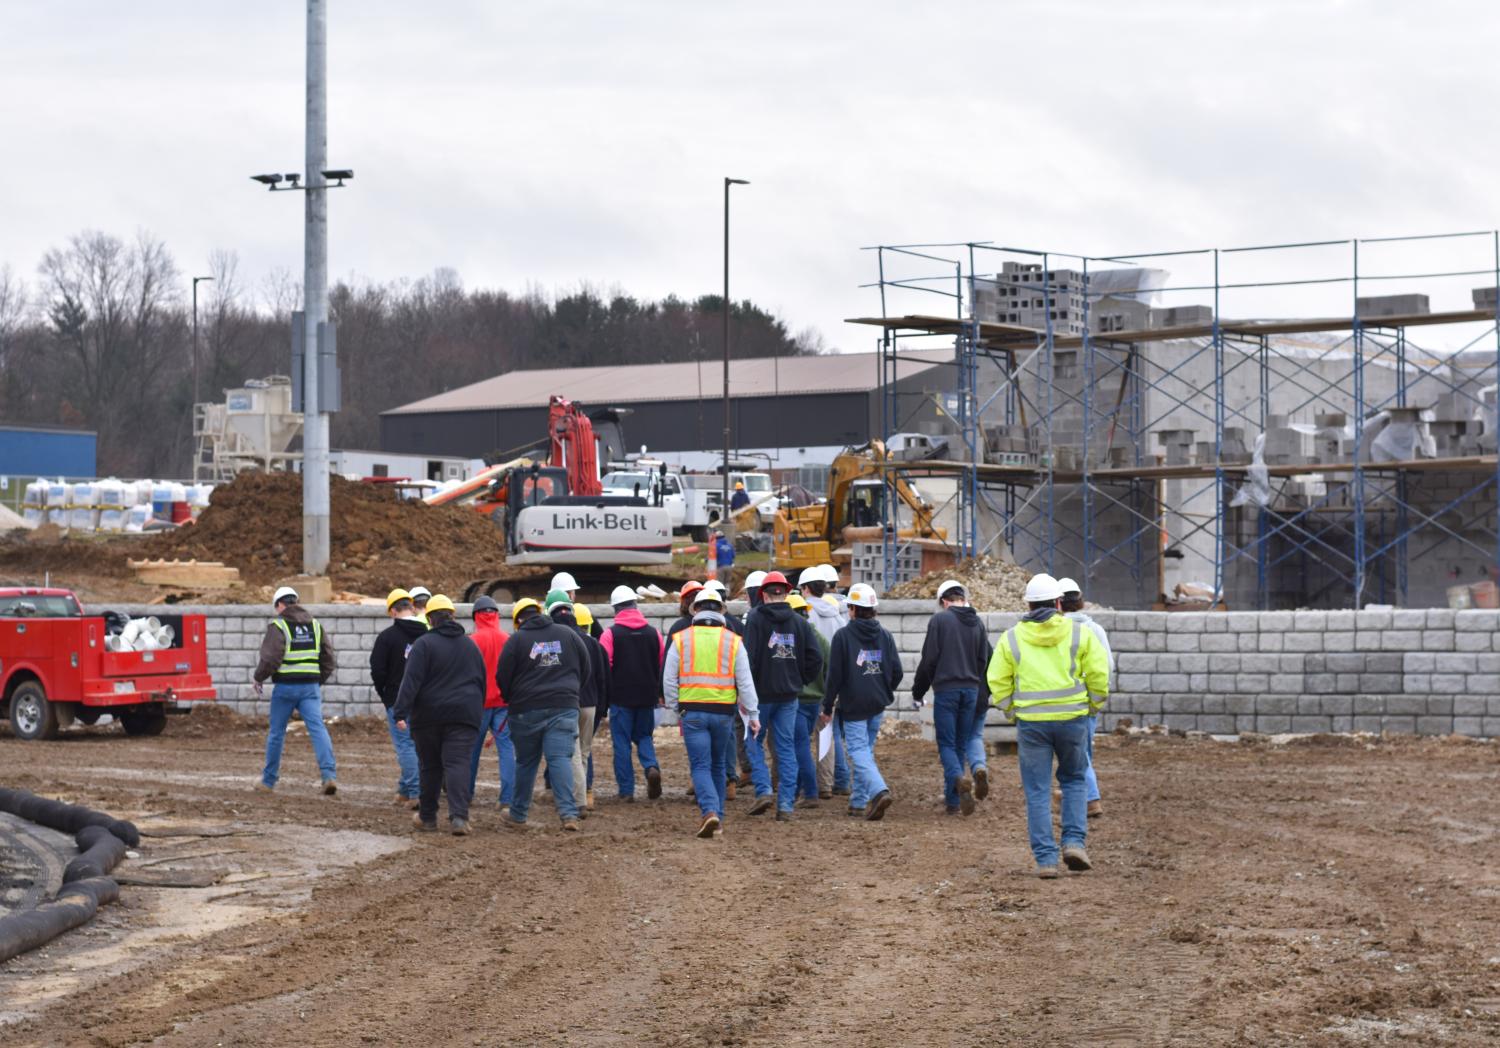 Four Cities Compact Carpentry students touring with Summit Construction